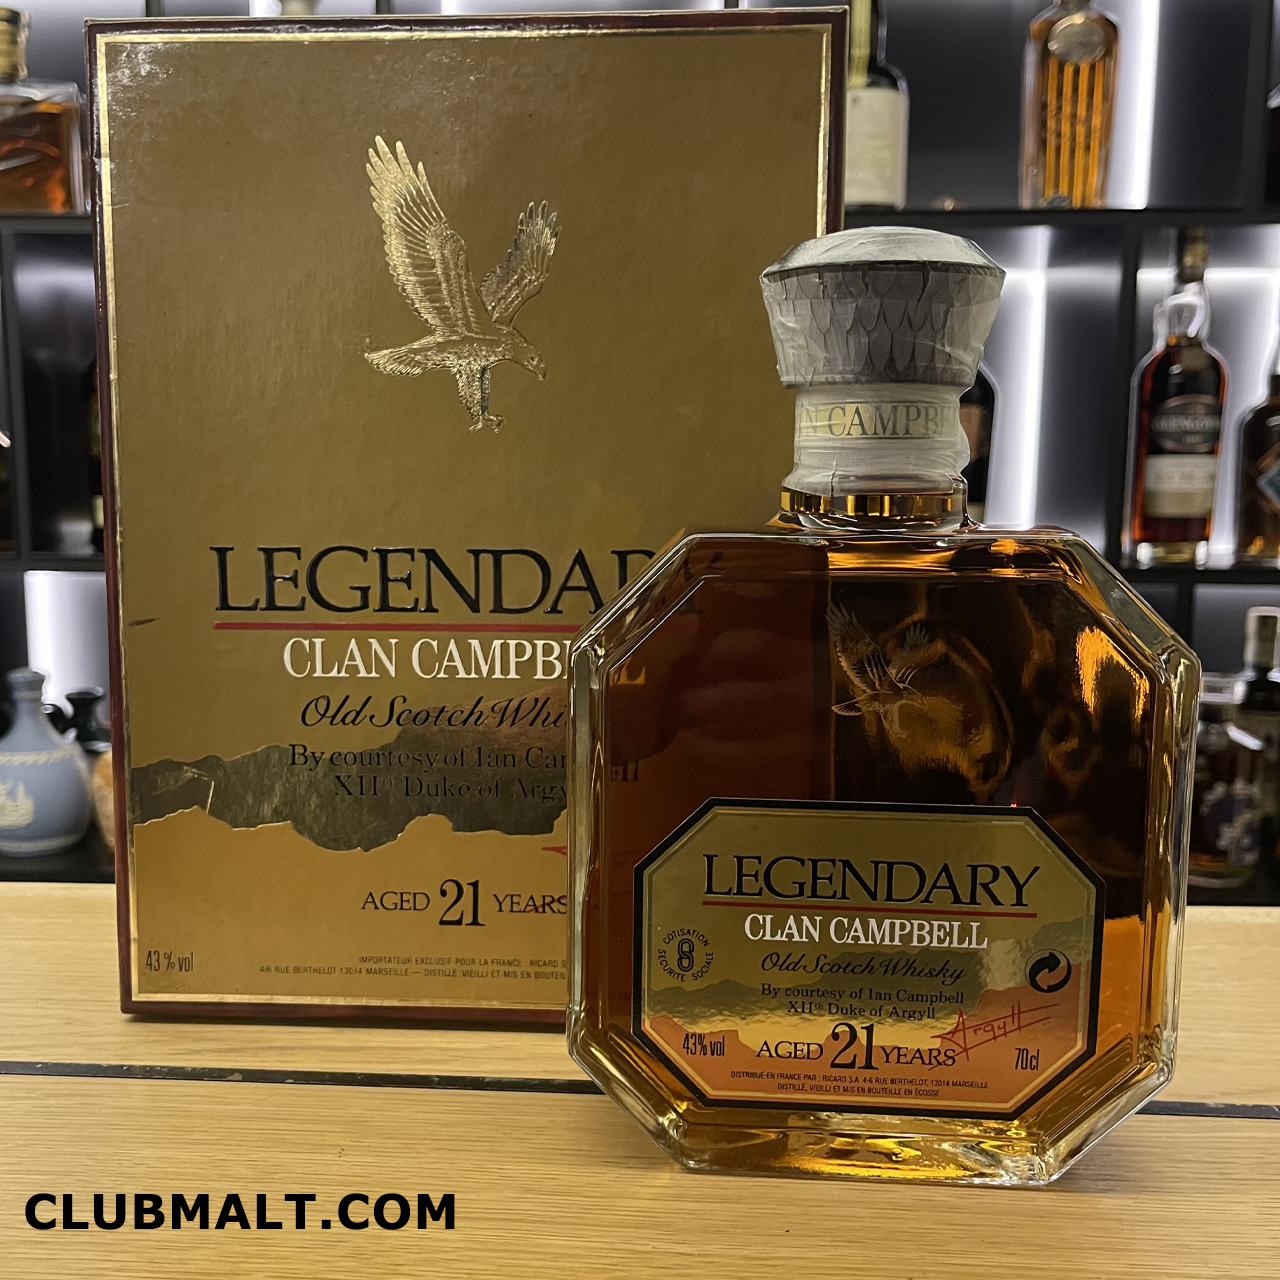 Clan Campbell Legendary 18 Year Old